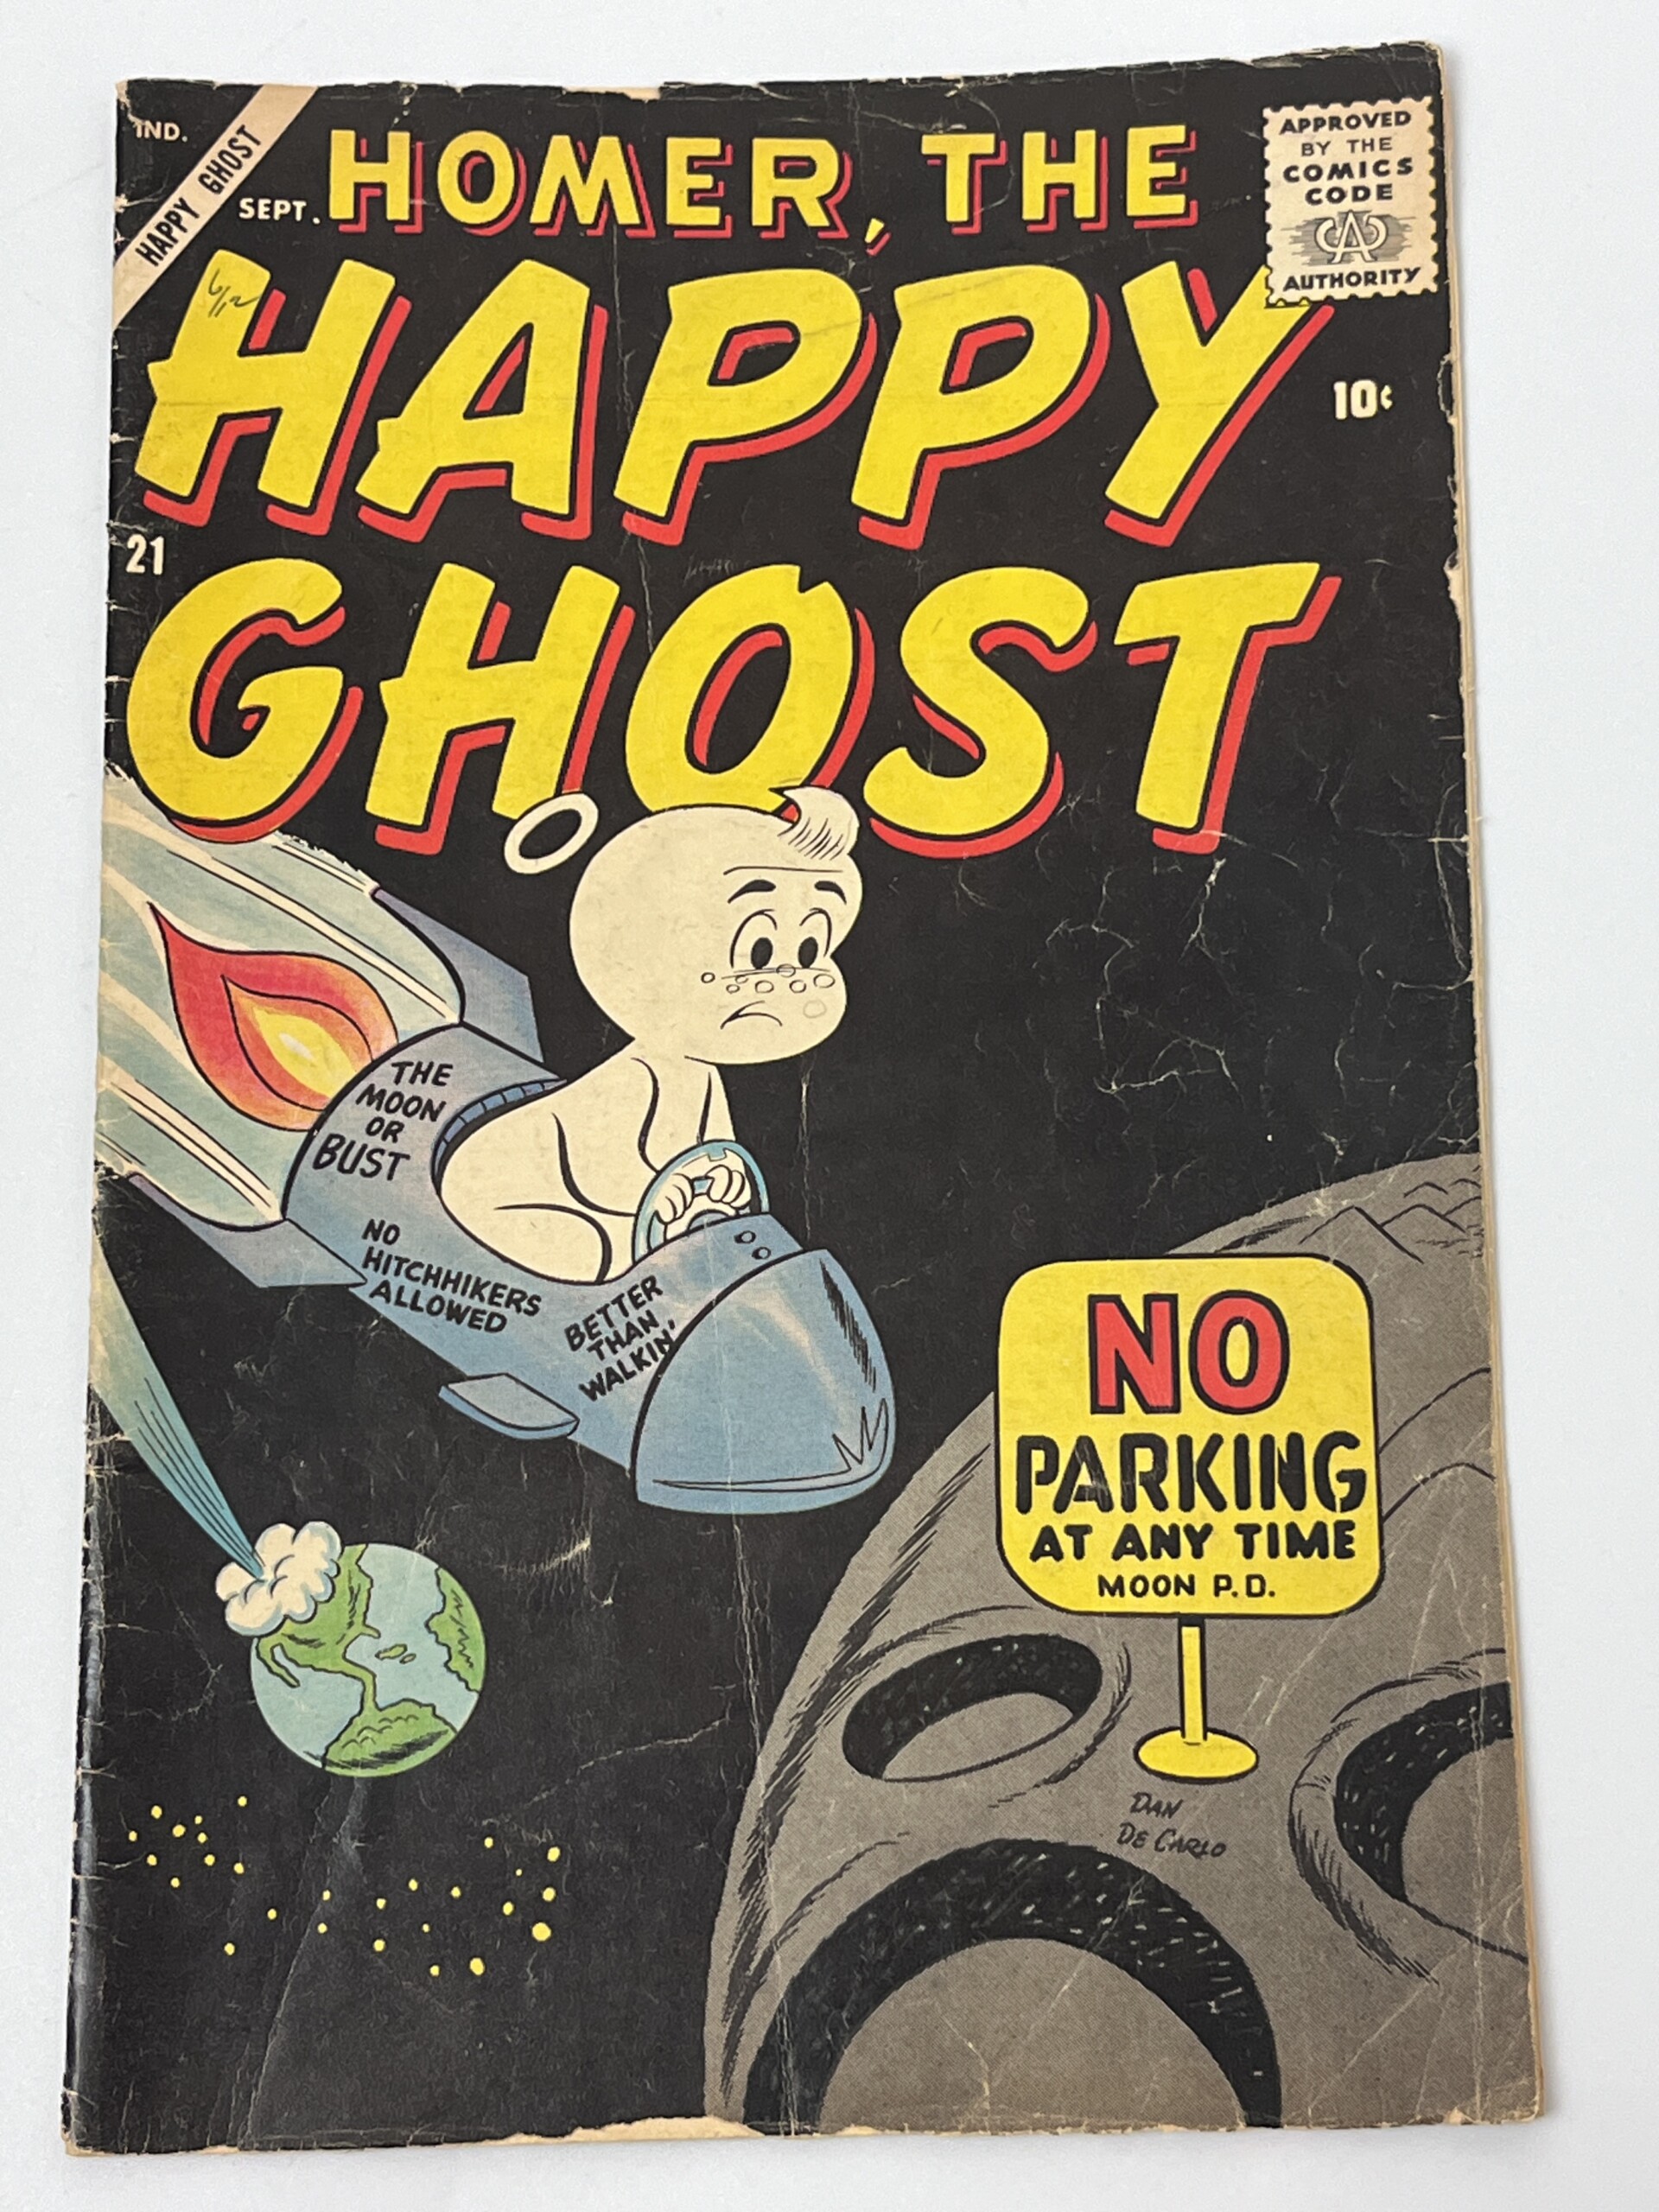 Homer the Happy Ghost #21 (1958) in 3.0 Good/Very Good